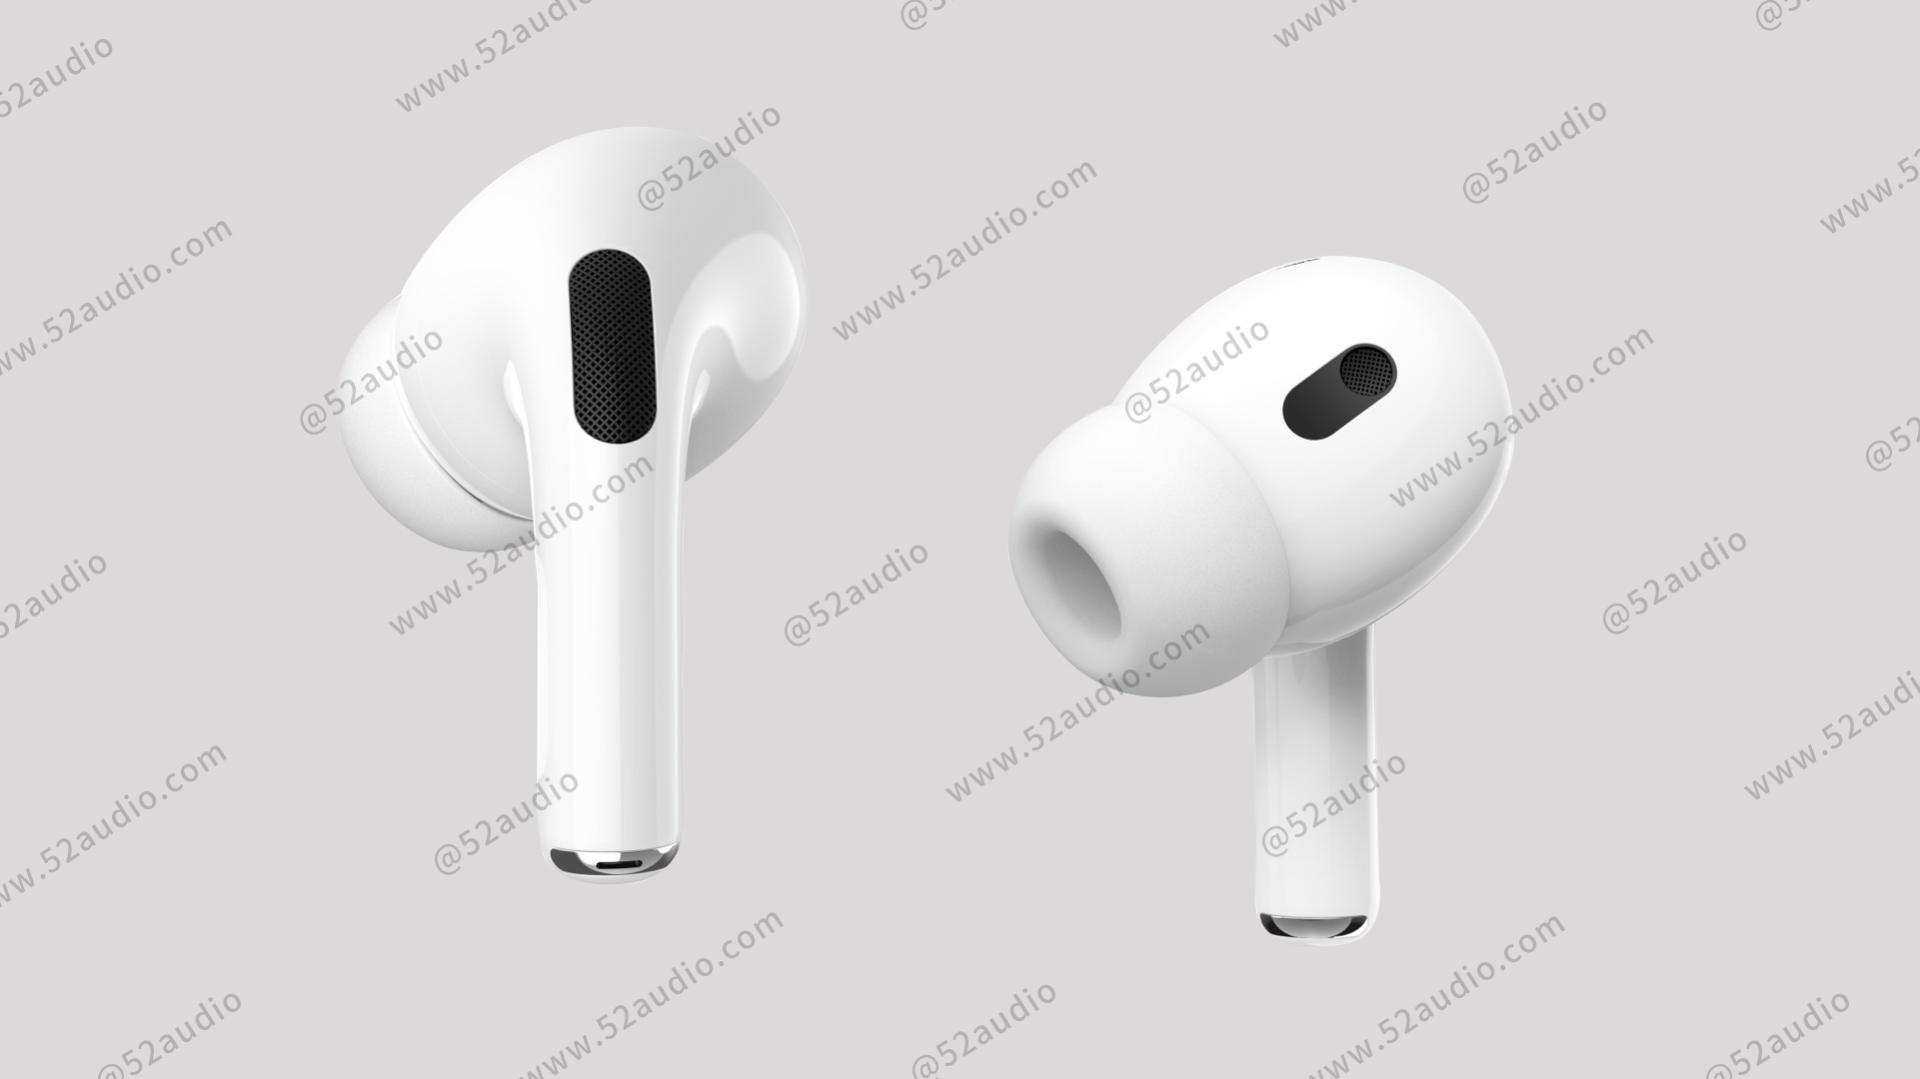 Rumored image of Apple Airpods Pro 2